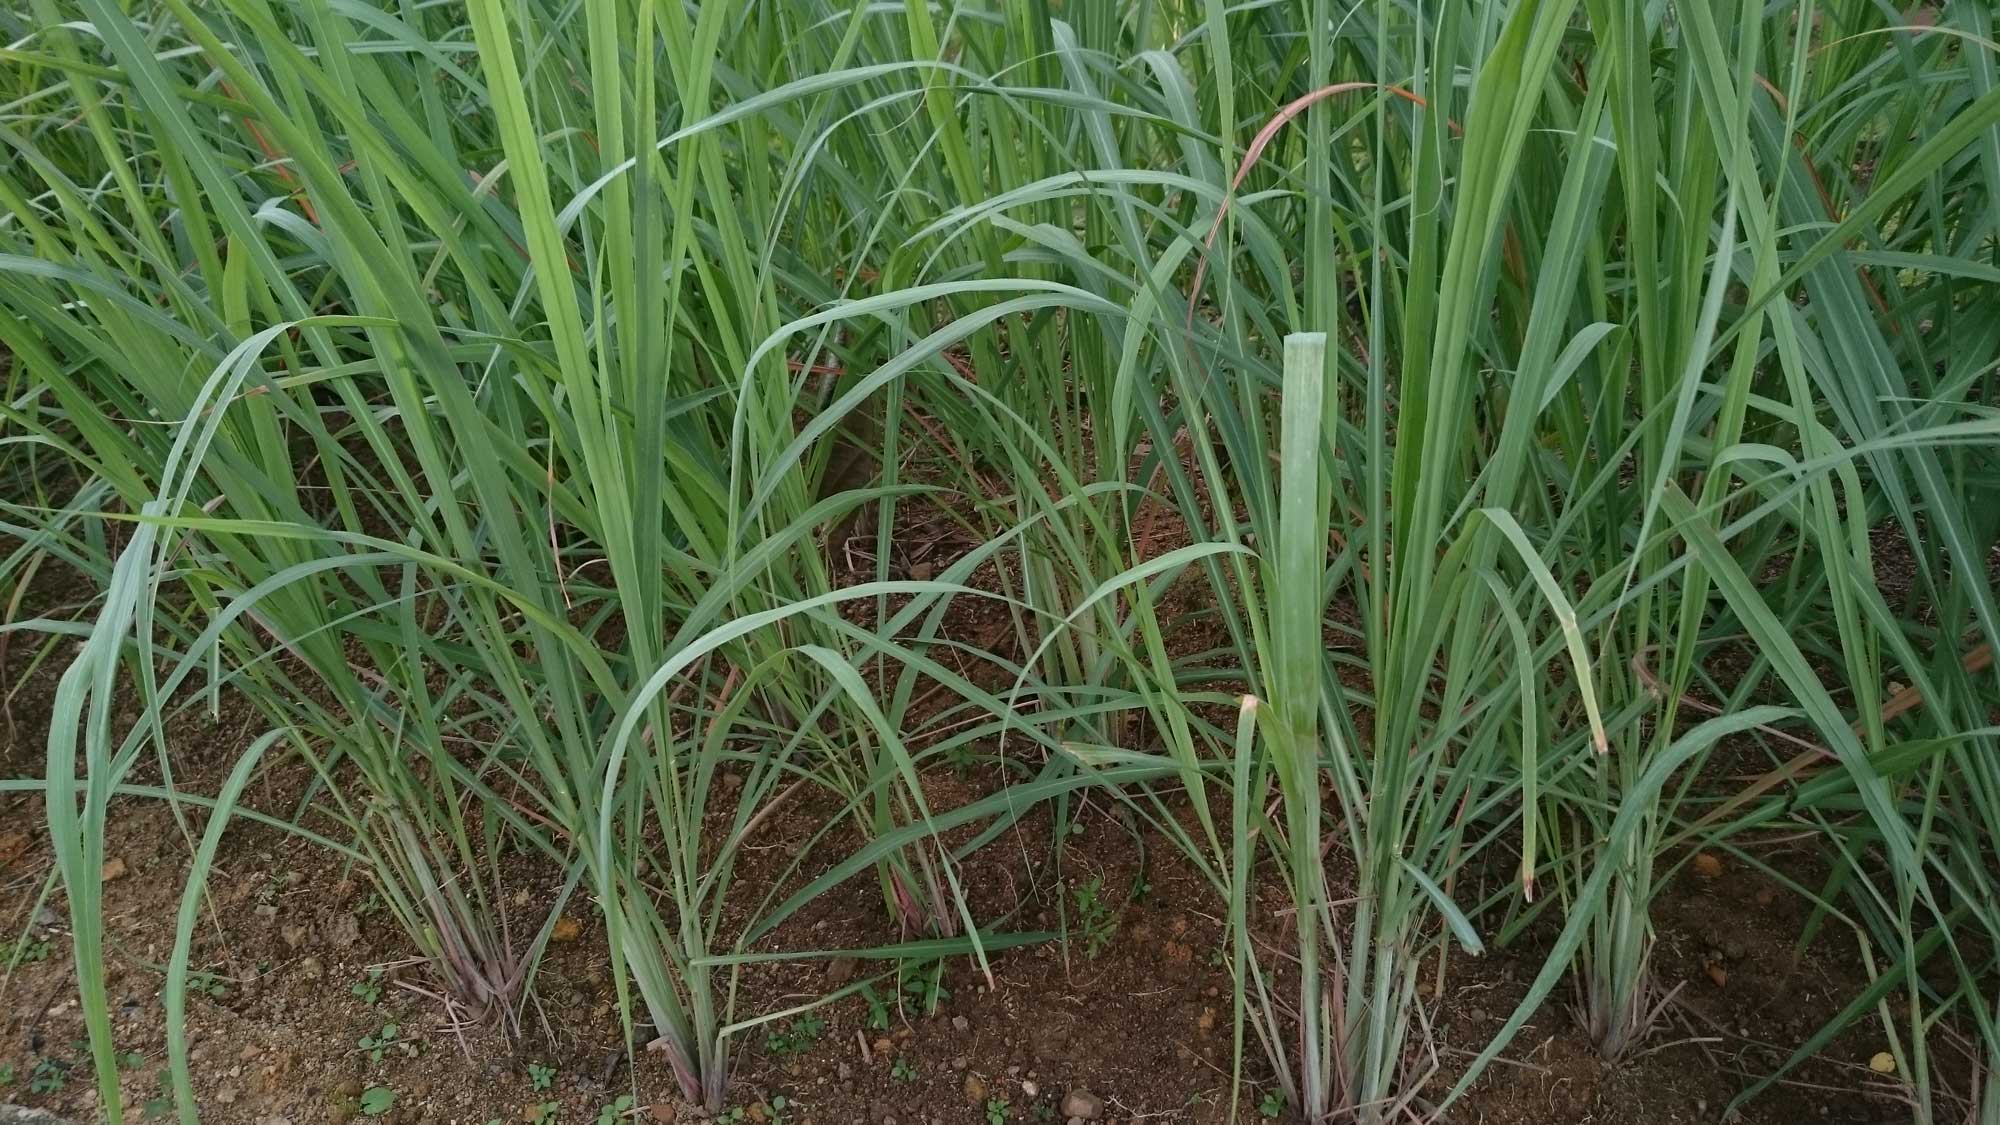 Photograph of lemongrass. The photo sows lemongrass plants growing in coarse-grained soil.